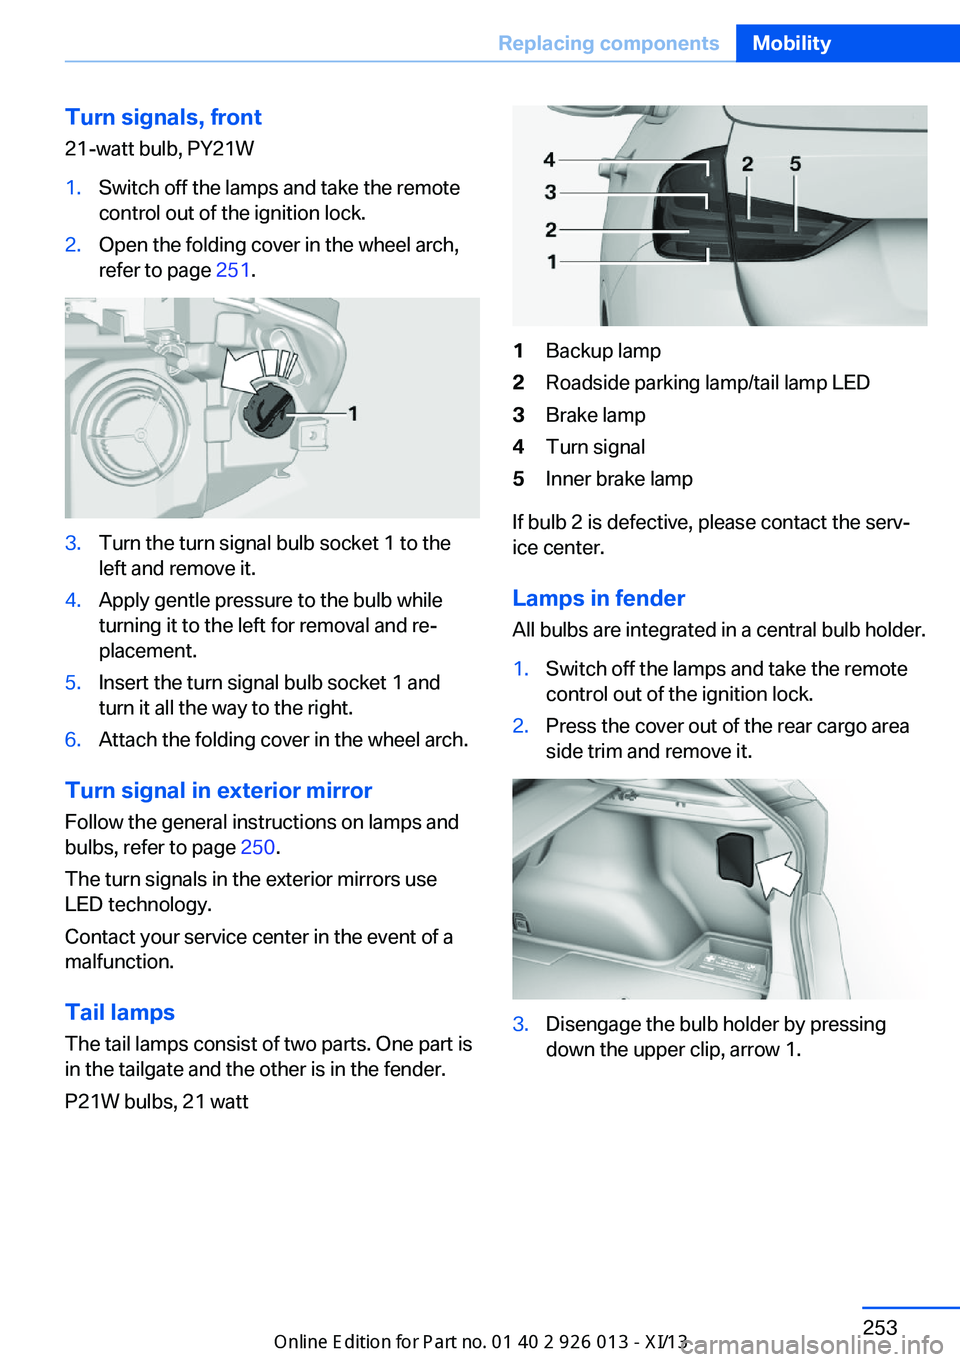 BMW X1 2013 E84 Owners Manual Turn signals, front21-watt bulb, PY21W1.Switch off the lamps and take the remote
control out of the ignition lock.2.Open the folding cover in the wheel arch,
refer to page  251.3.Turn the turn signal 